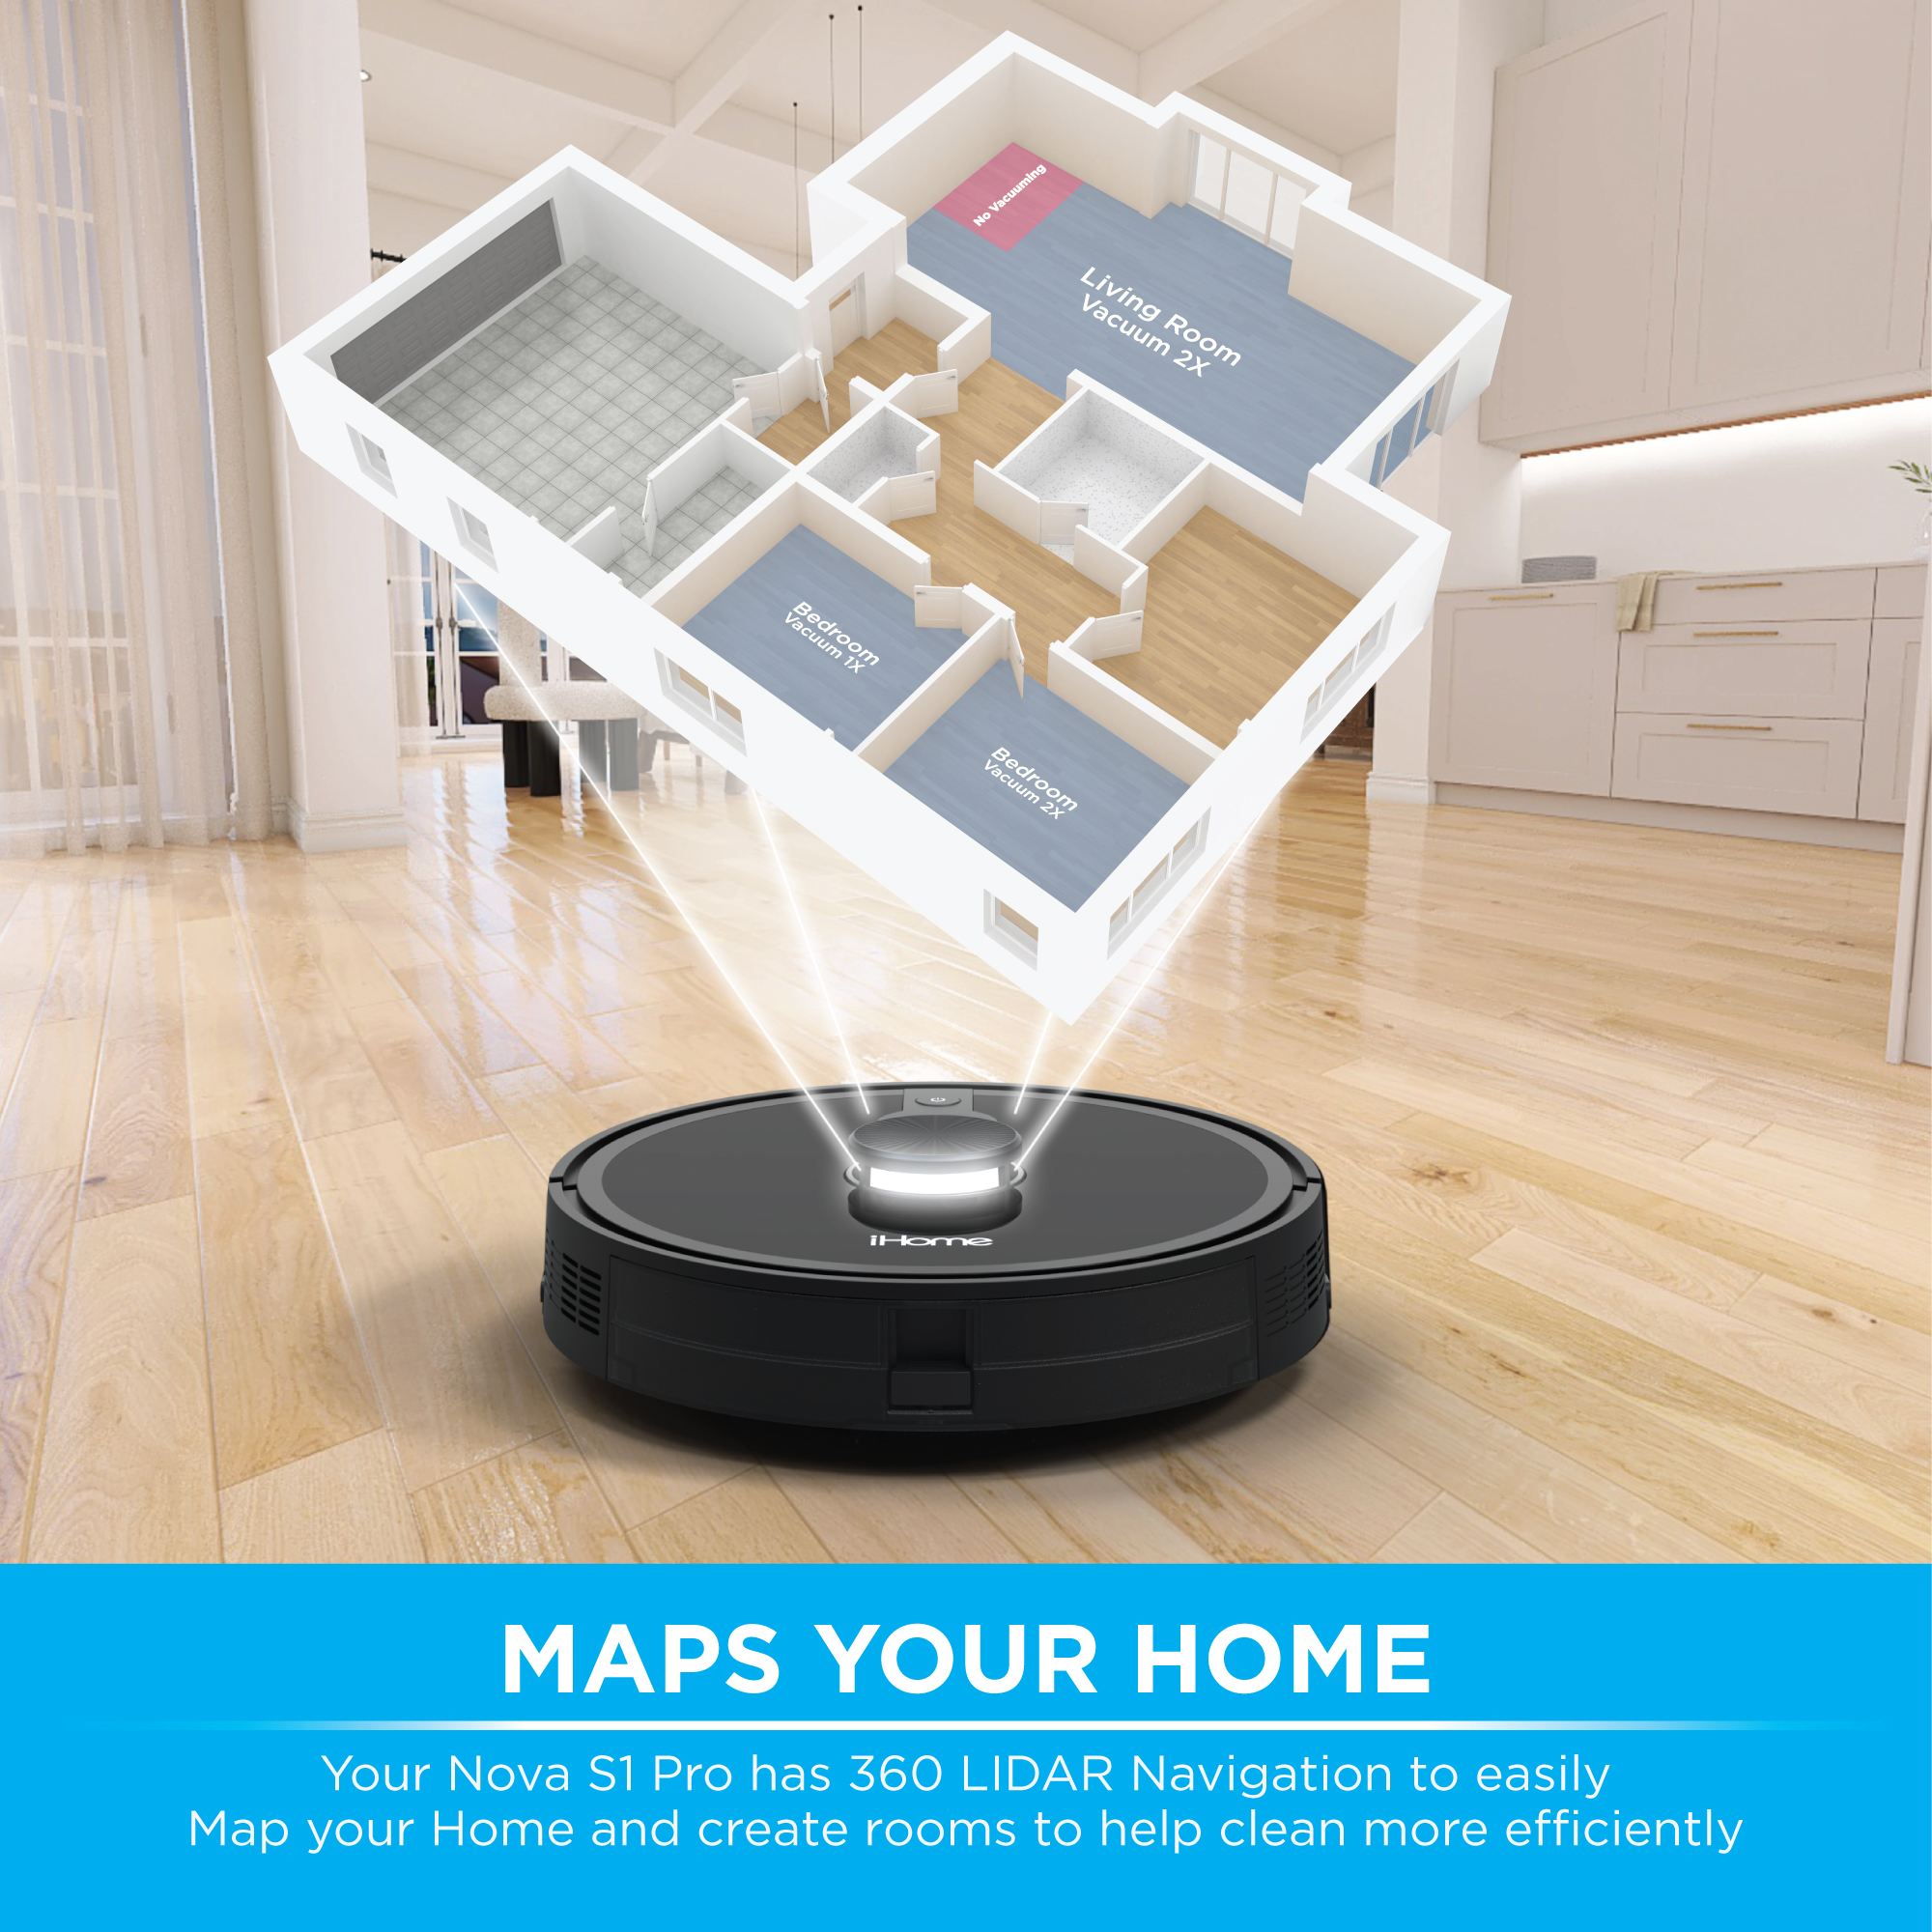 iHome AutoVac Nova S1 Pro Self Empty Robot Vacuum, LIDAR Mapping, 150 Min Runtime, Strong Suction, New - image 2 of 14